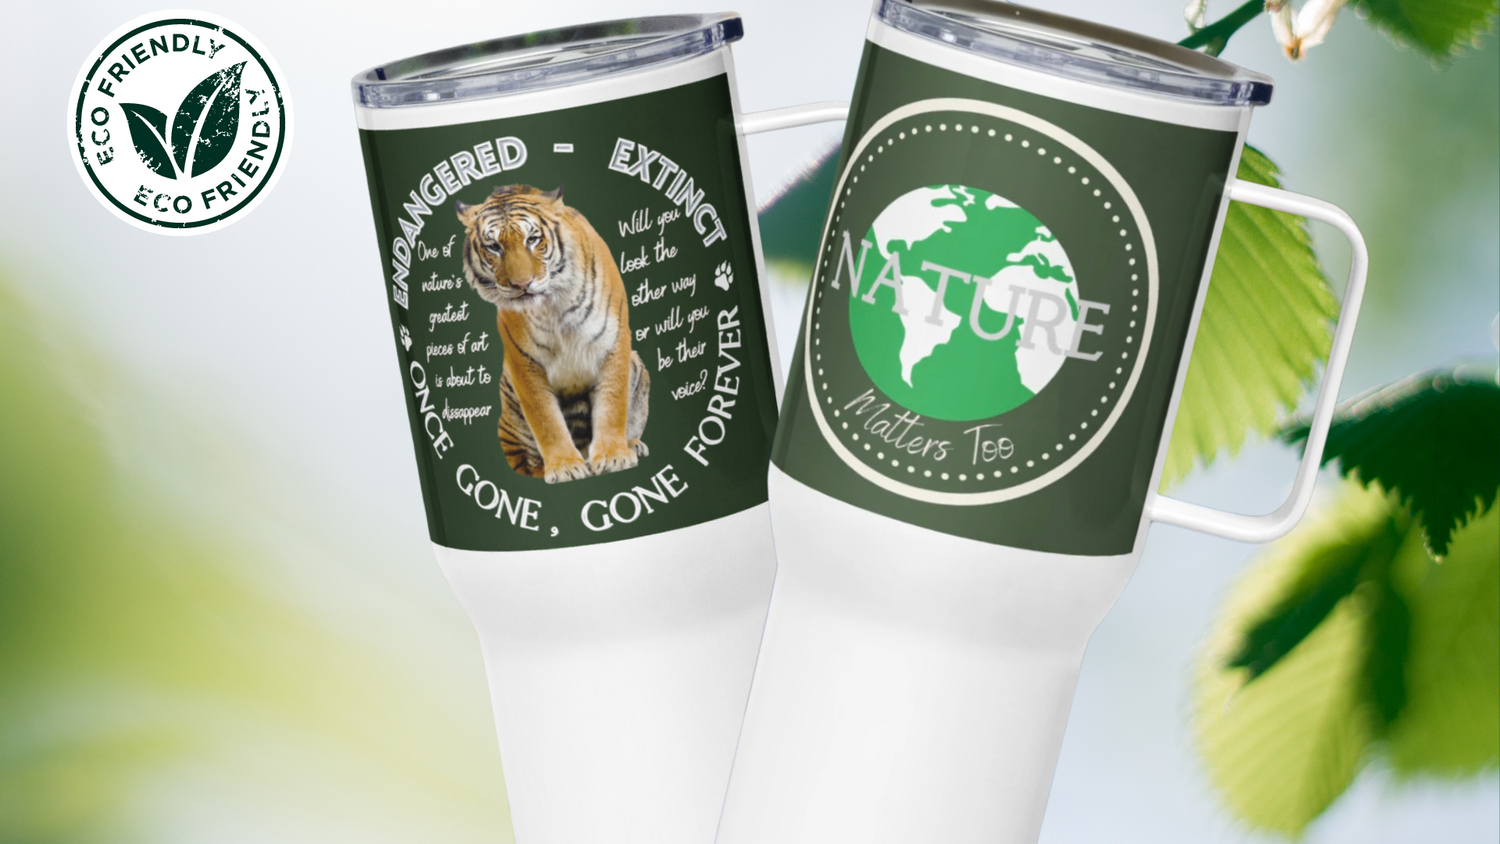 Fitz & Willow, nature, wildlife and inspirational themed travel mugs